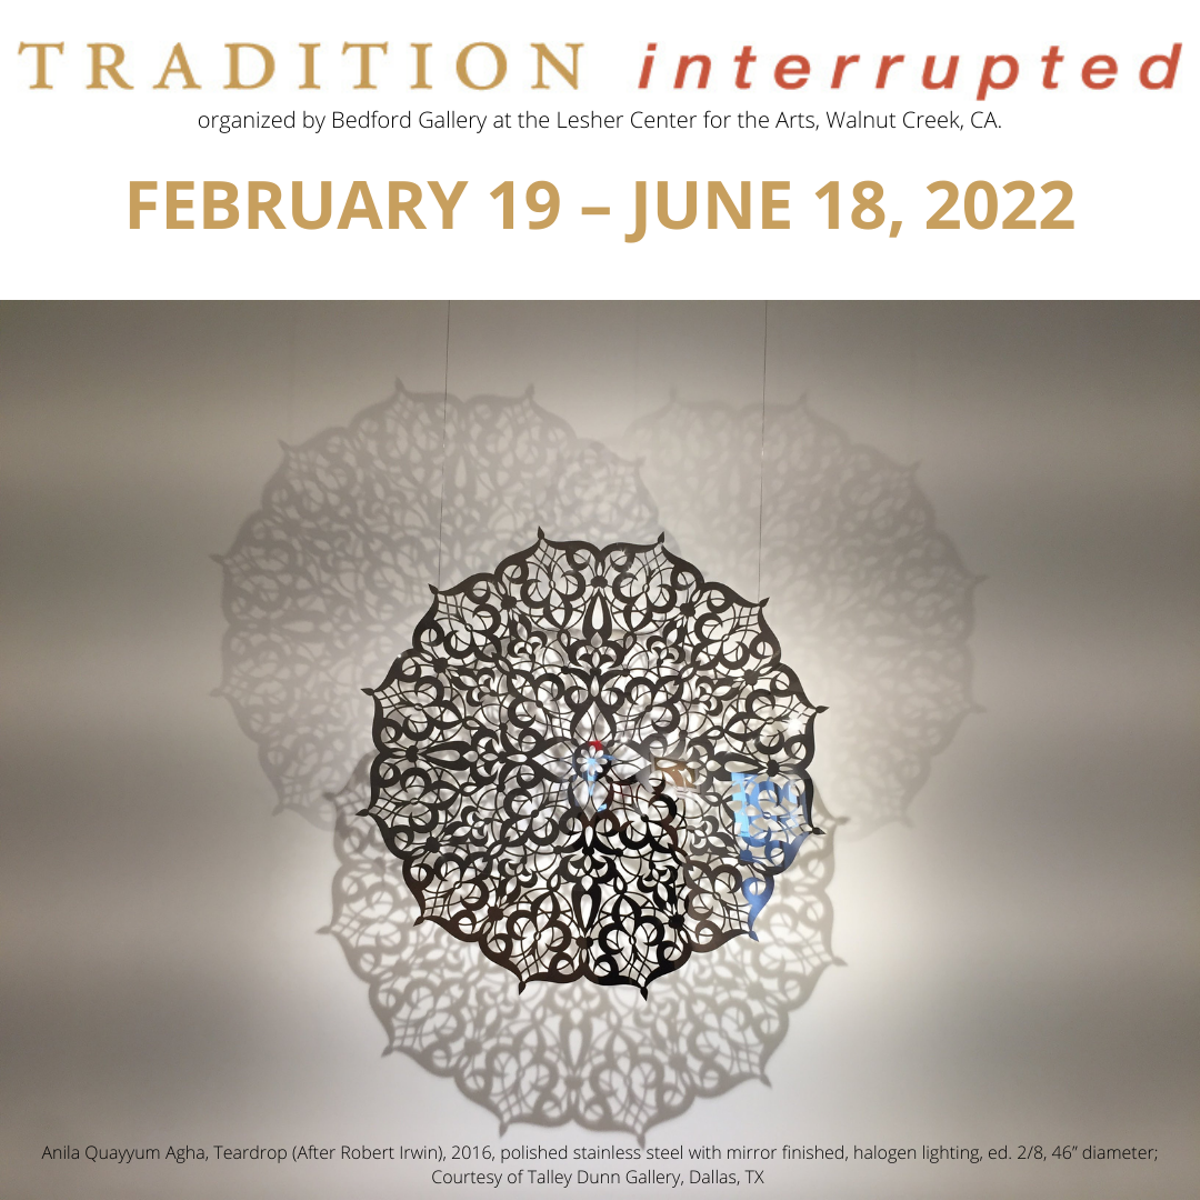 tradition_interrupted_logo_and_image_social_image_.png